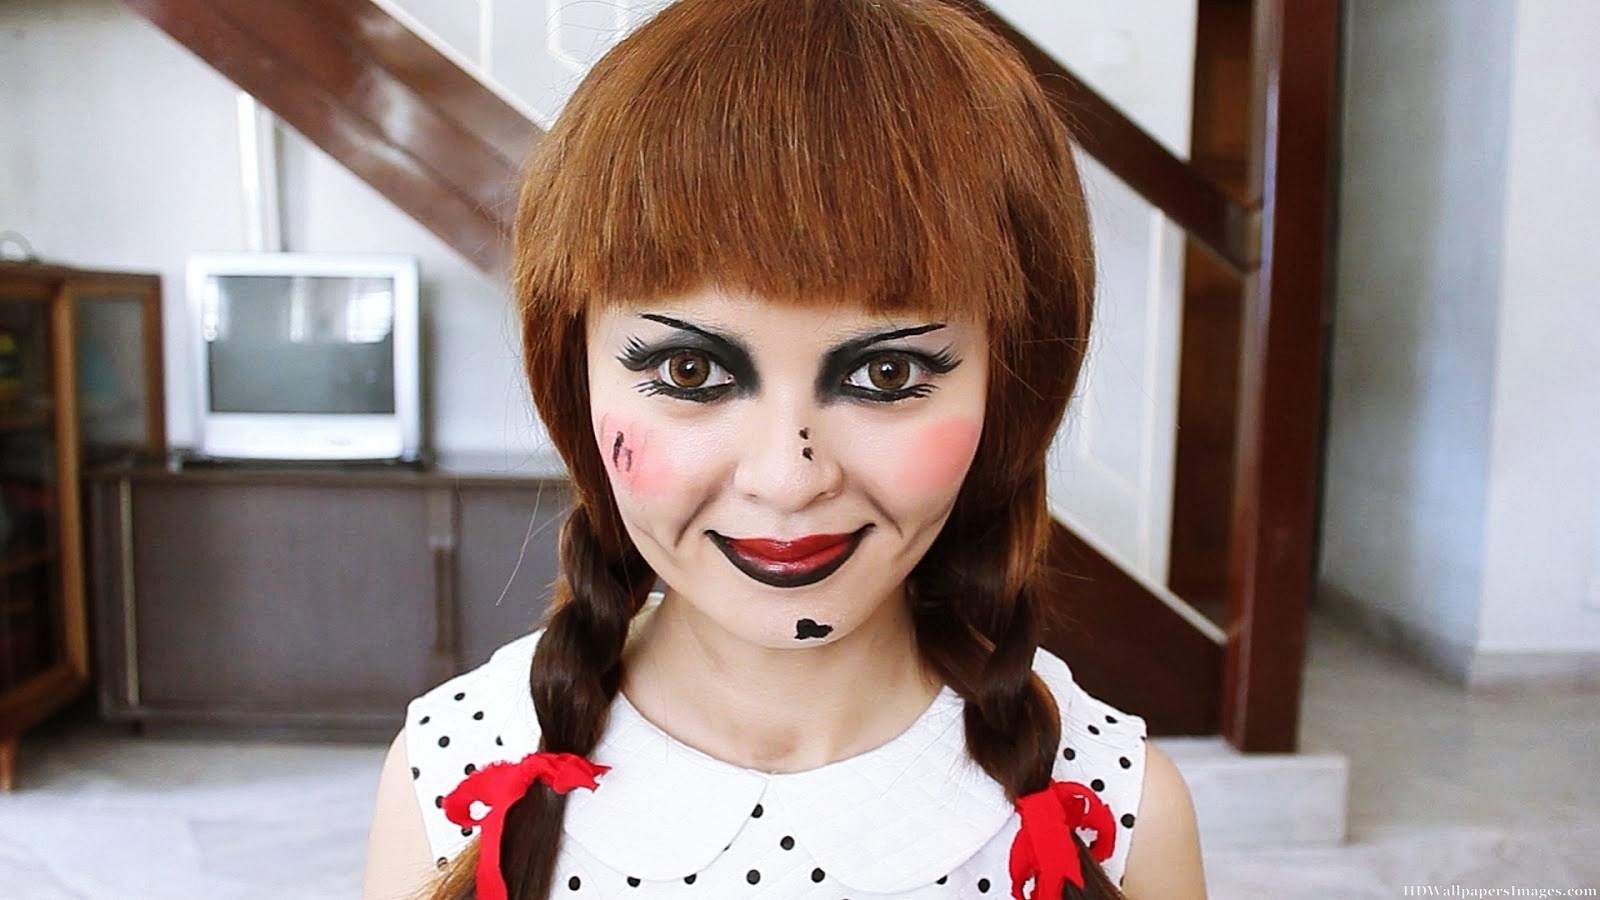 Annabelle-Doll-Makeup-Images.